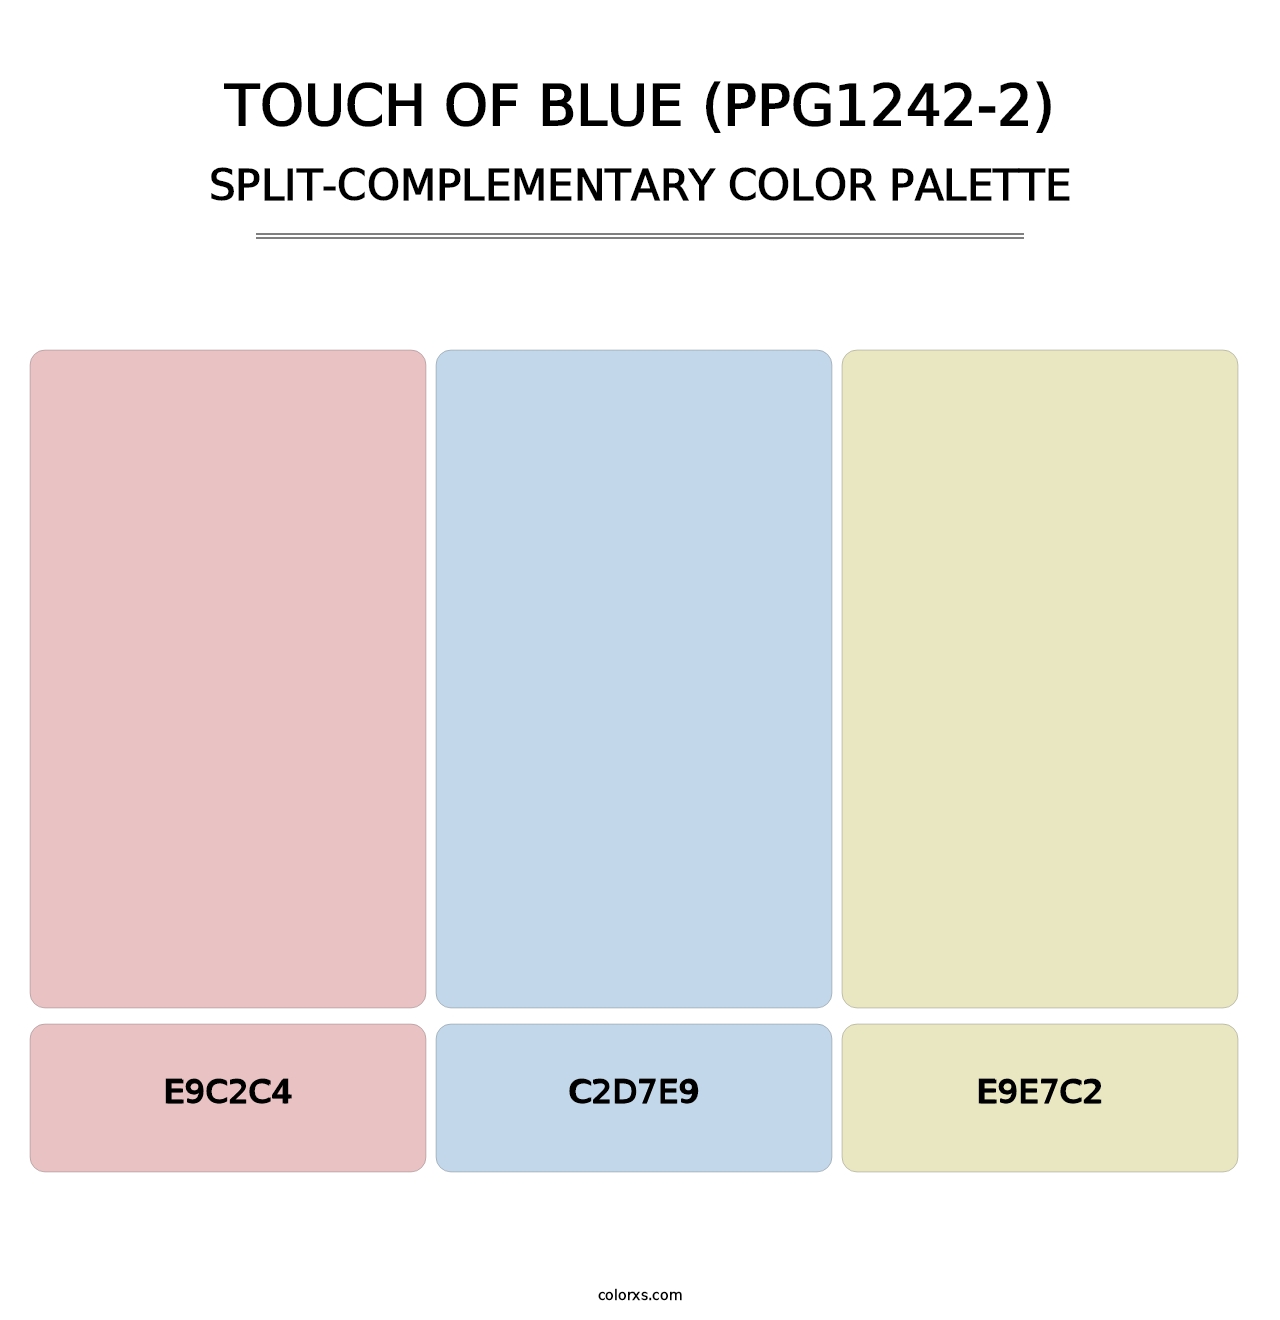 Touch Of Blue (PPG1242-2) - Split-Complementary Color Palette